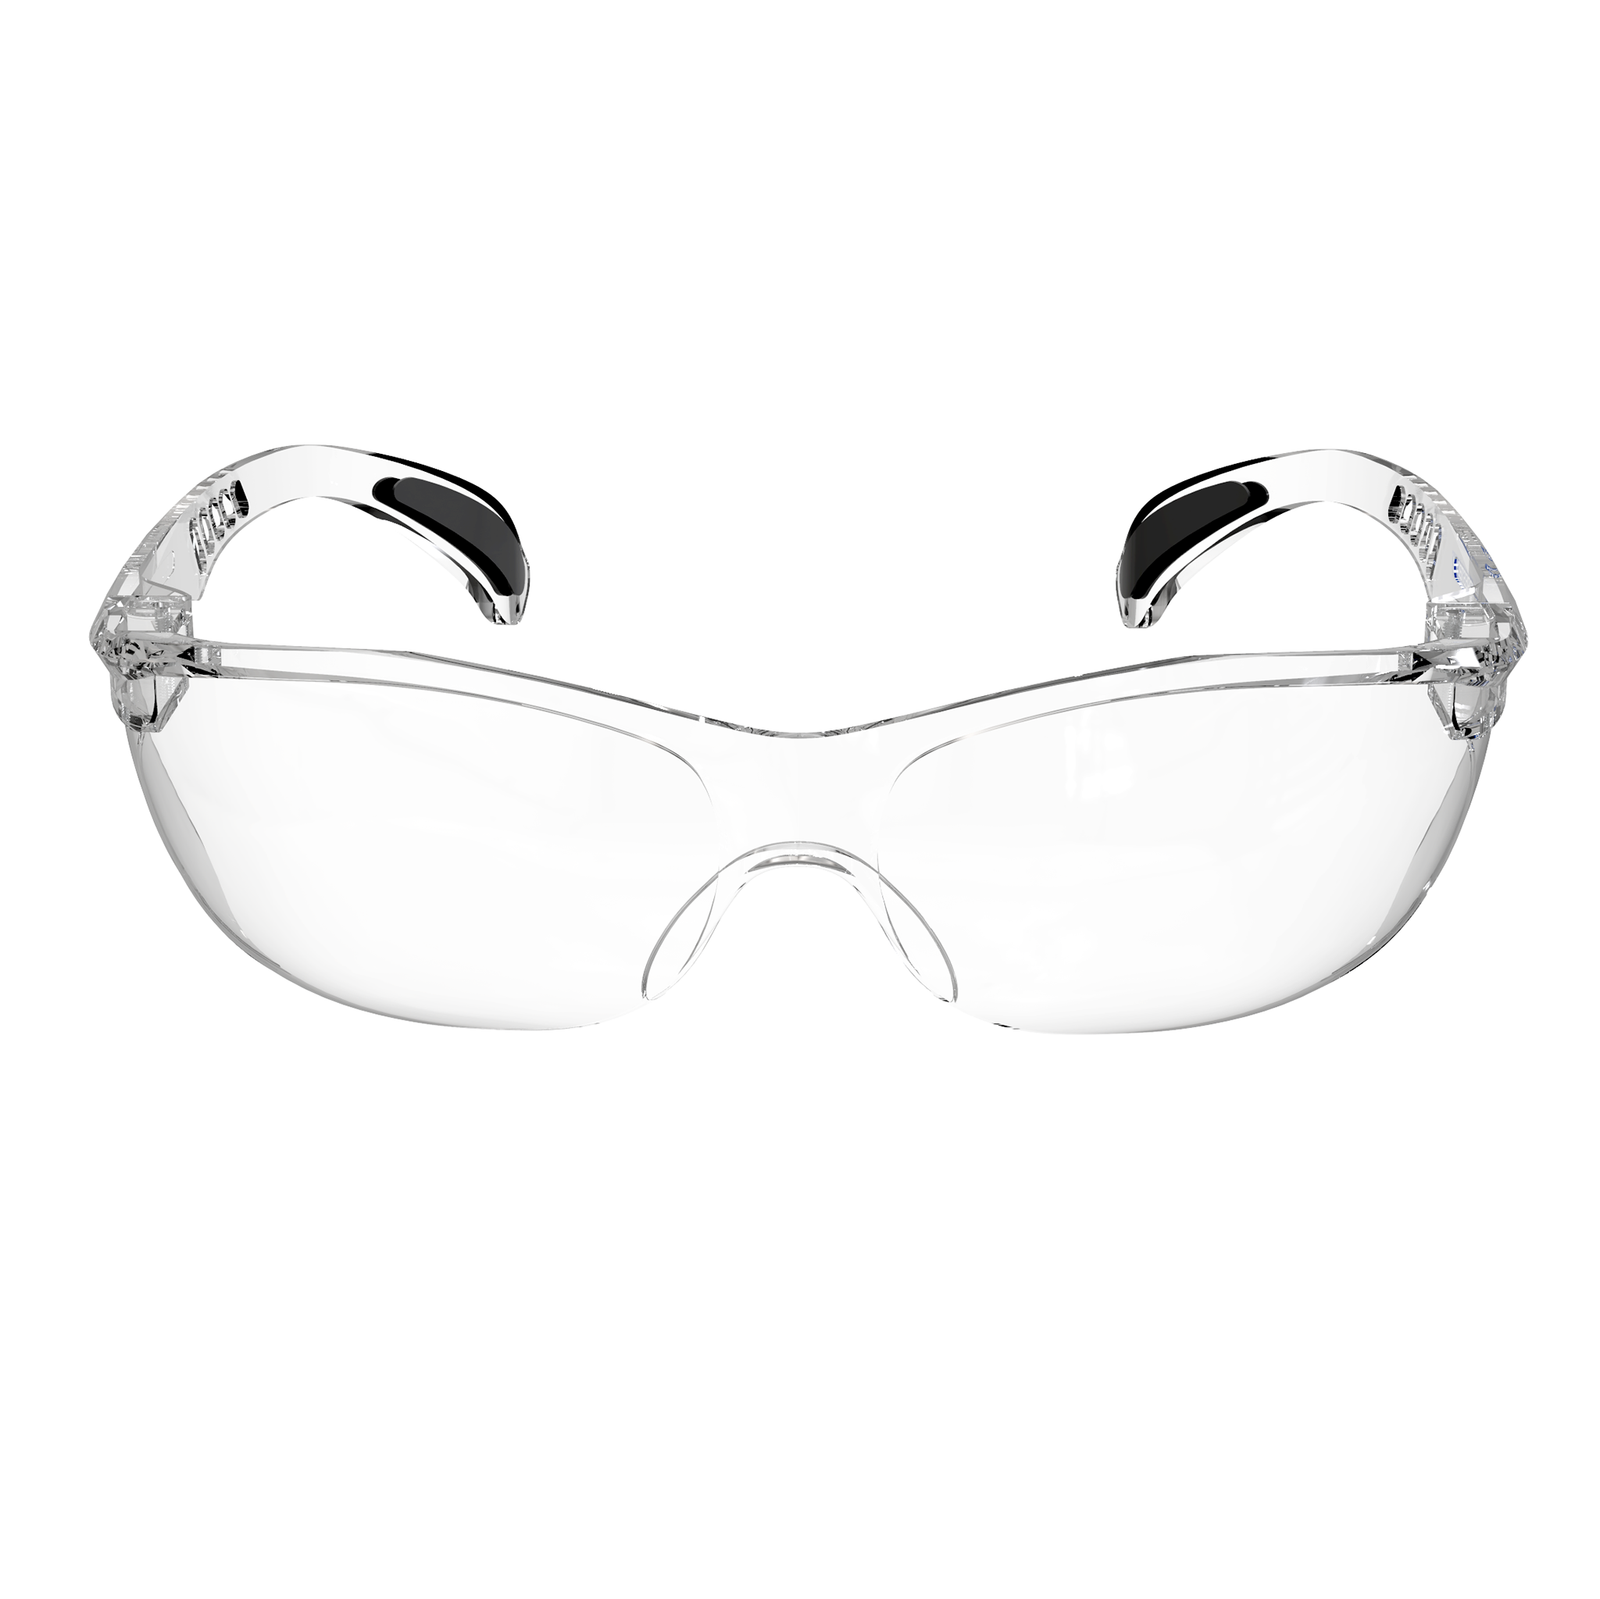 Front view of the clear JORESTECH panoramic safety glass for high impact protection.  Temples of this ANSI compliant glasses have details in black. 